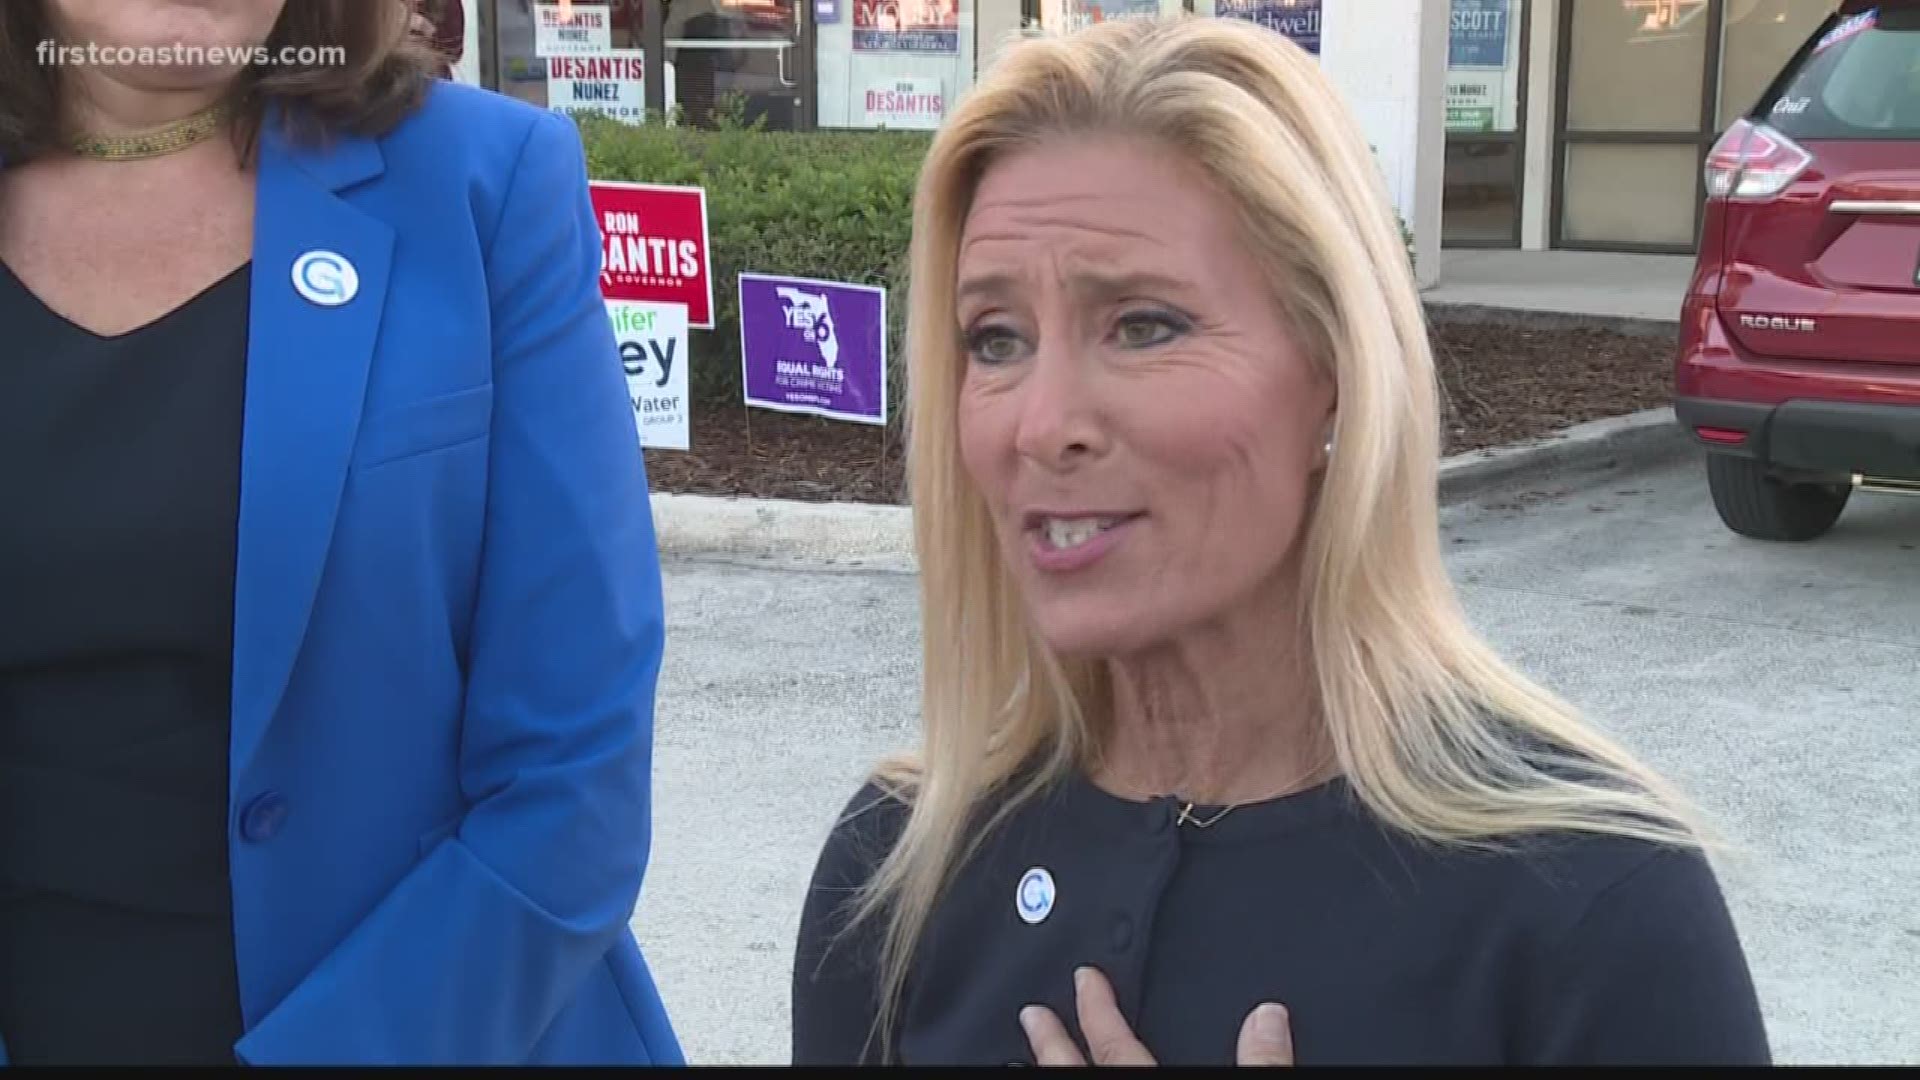 Jacksonville-native and former anchor Donna Deegan is expected to announce her run for Congress on Thursday.